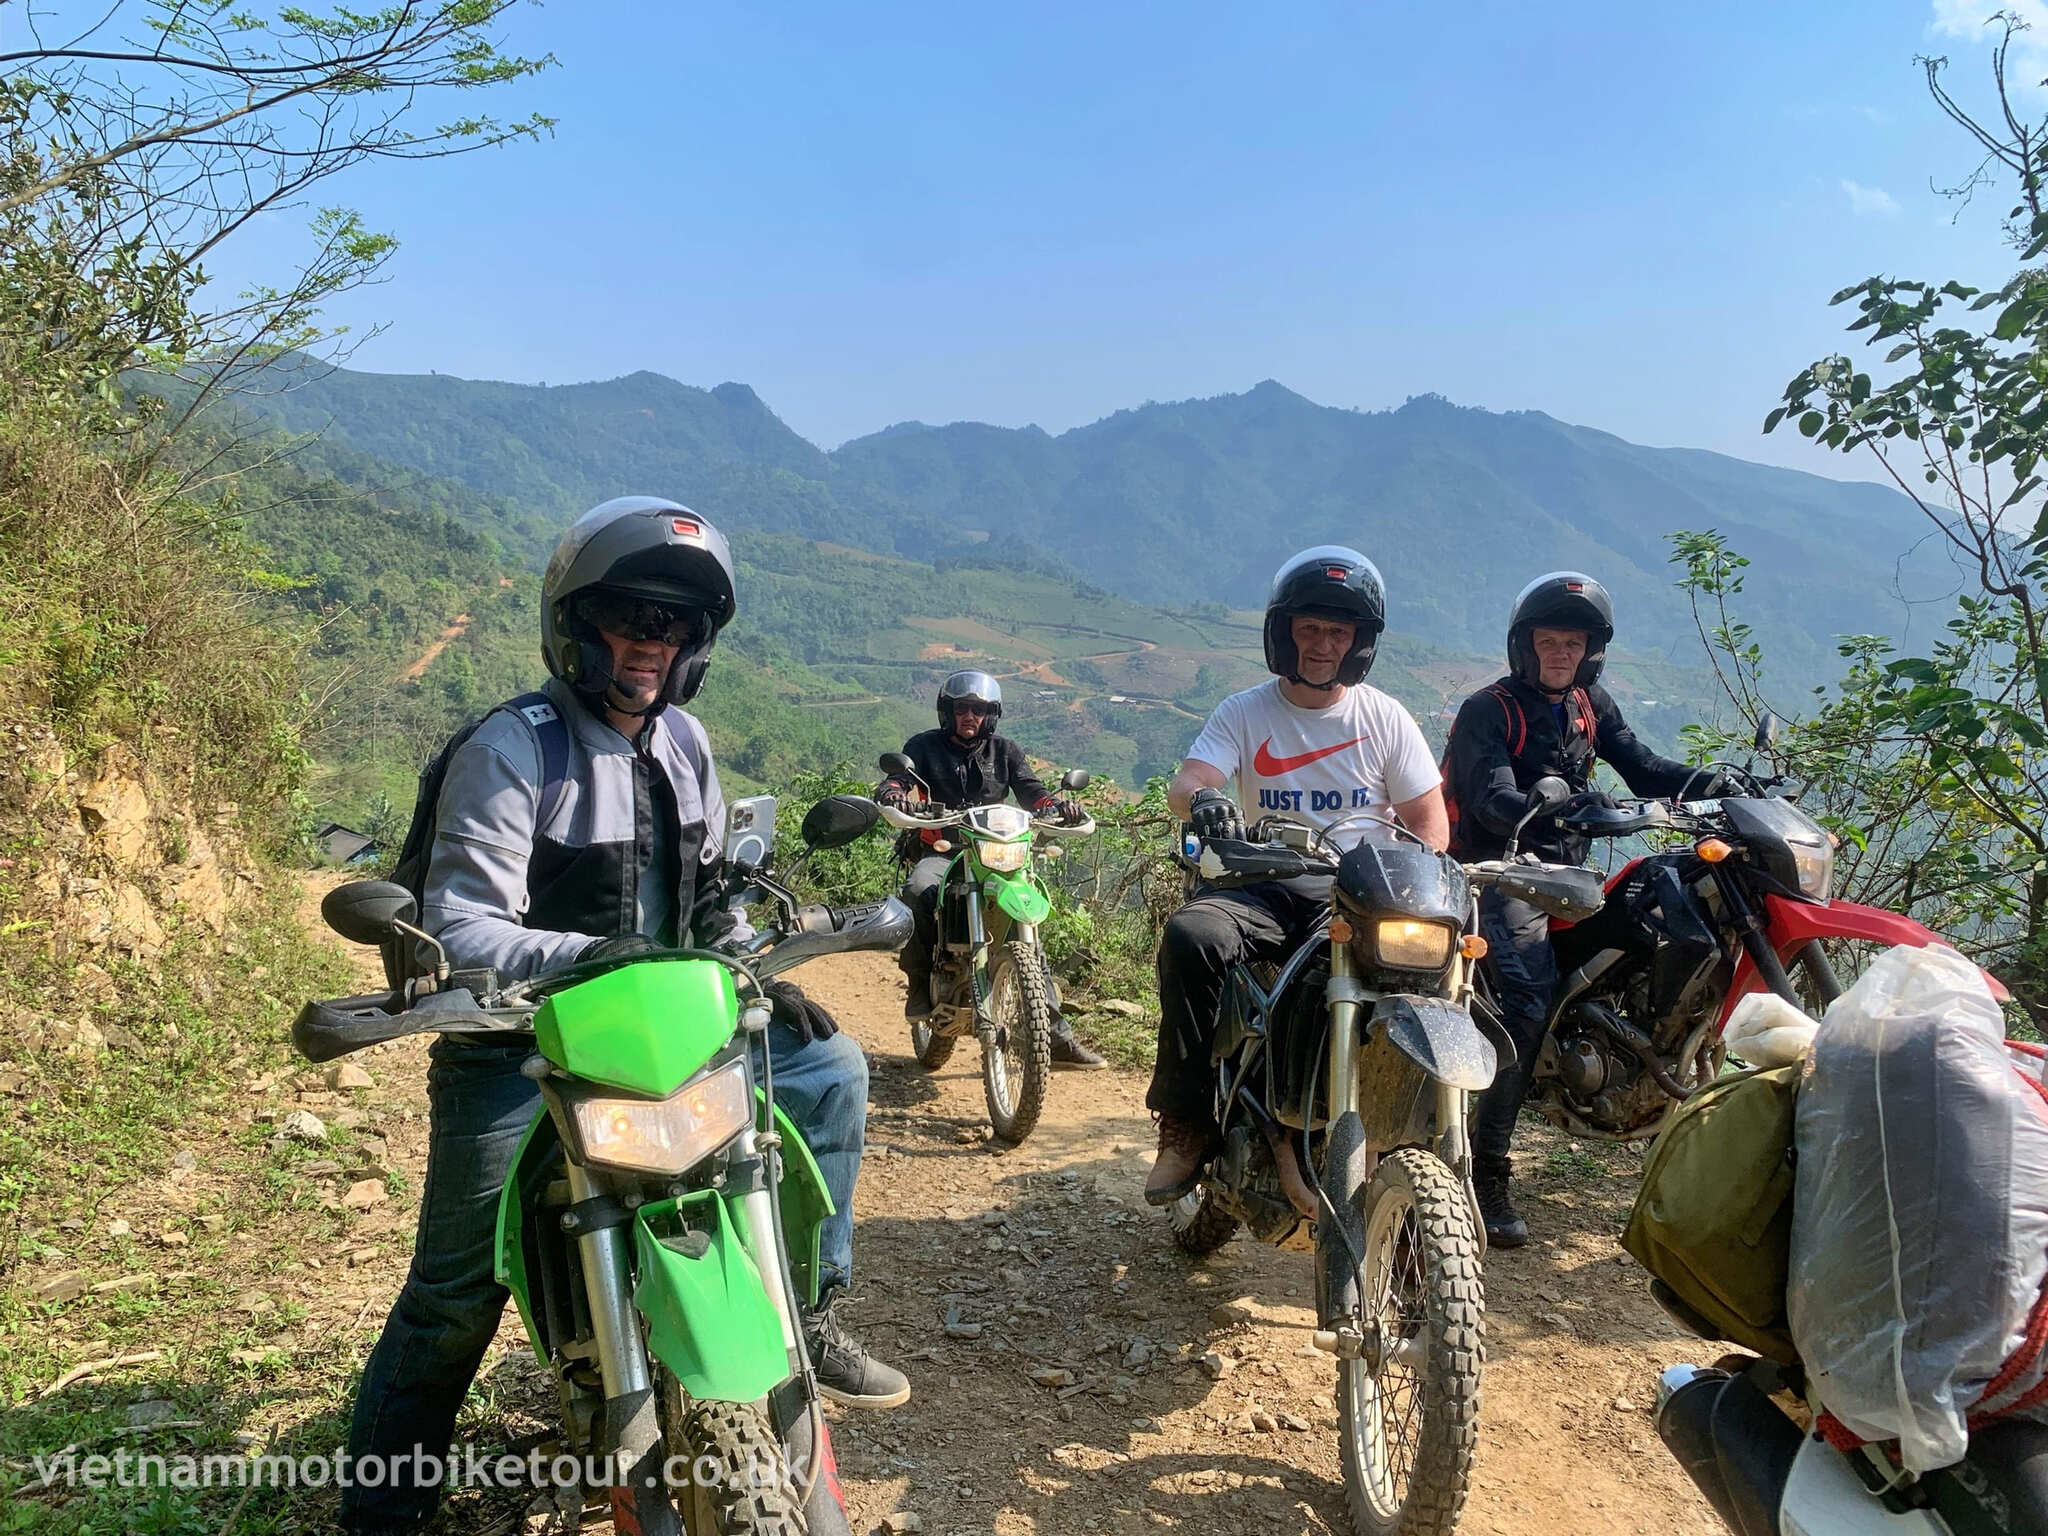 North east vietnam motorbike tour to son la cao bang 7 - How to Plan a Vietnam Motorbike Tour - Useful Tips For First-time Travelers